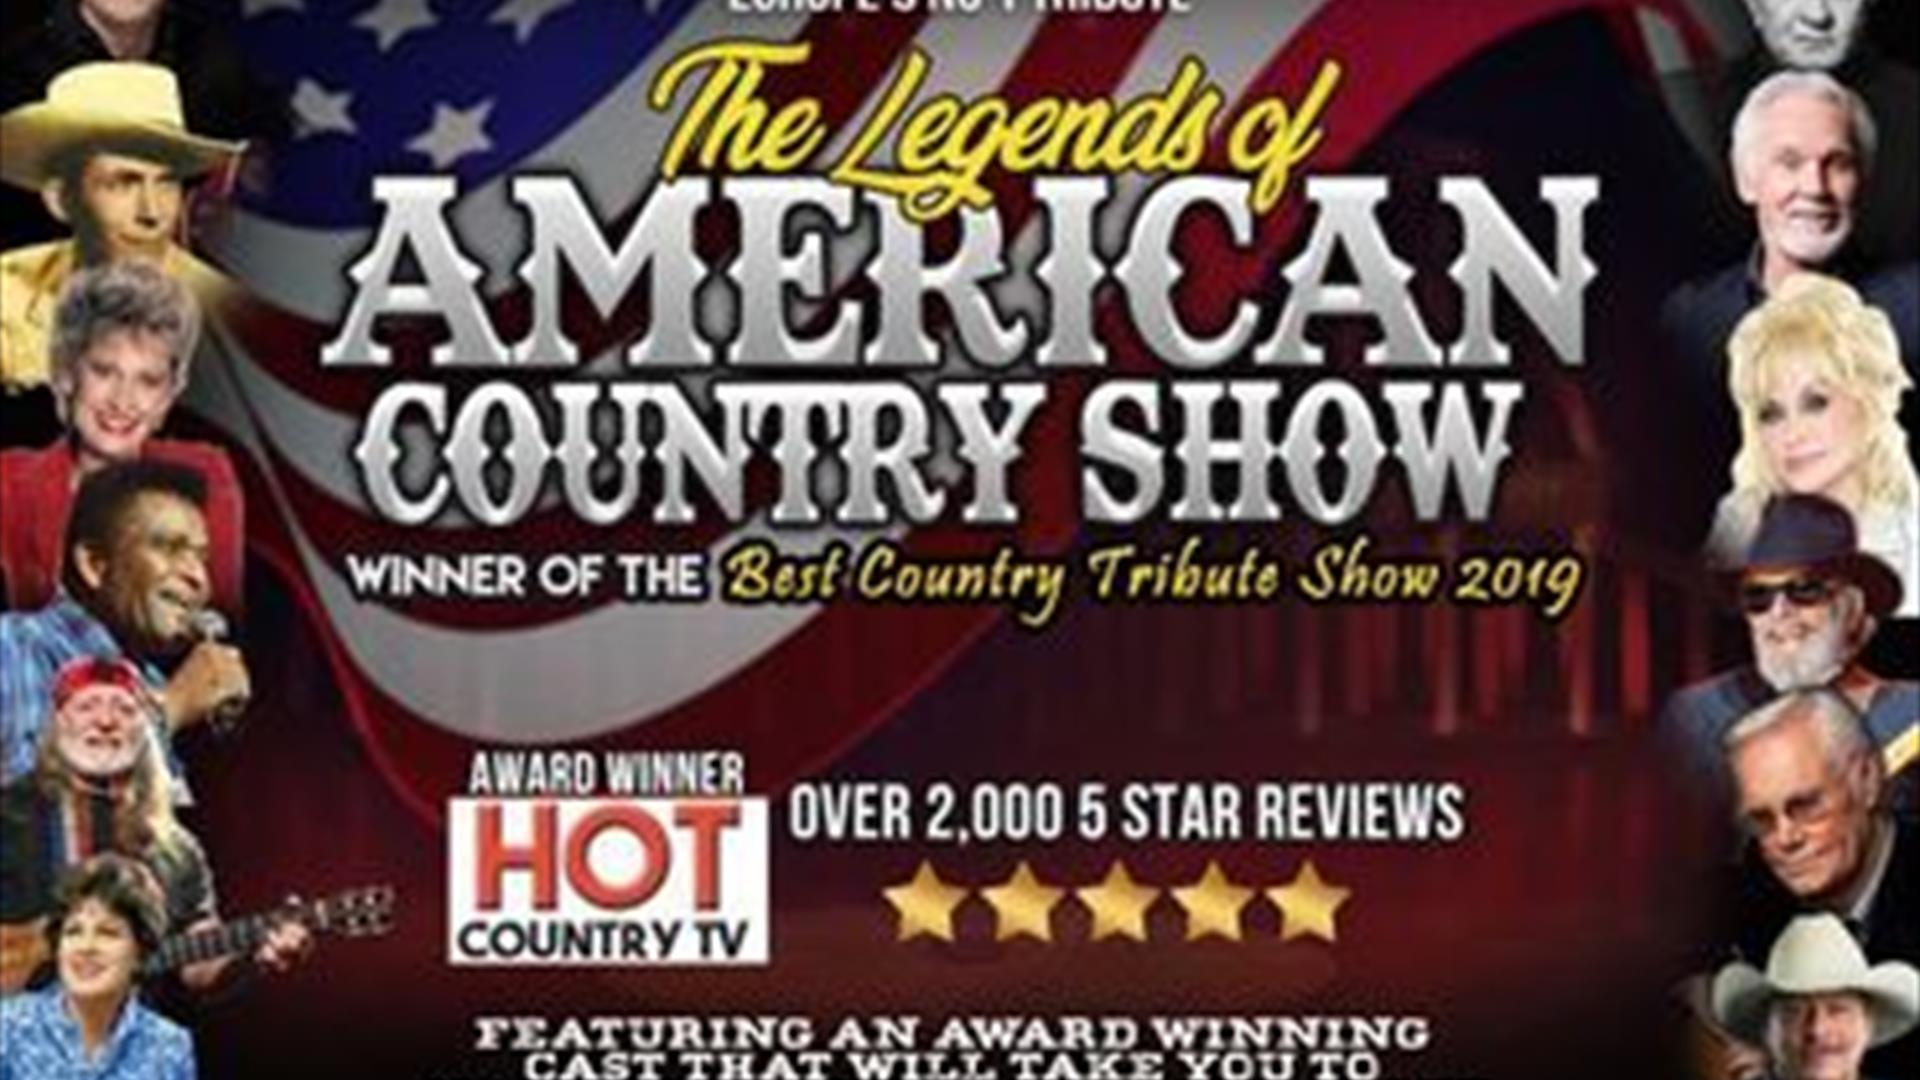 Poster with images of the greatest American Country stars